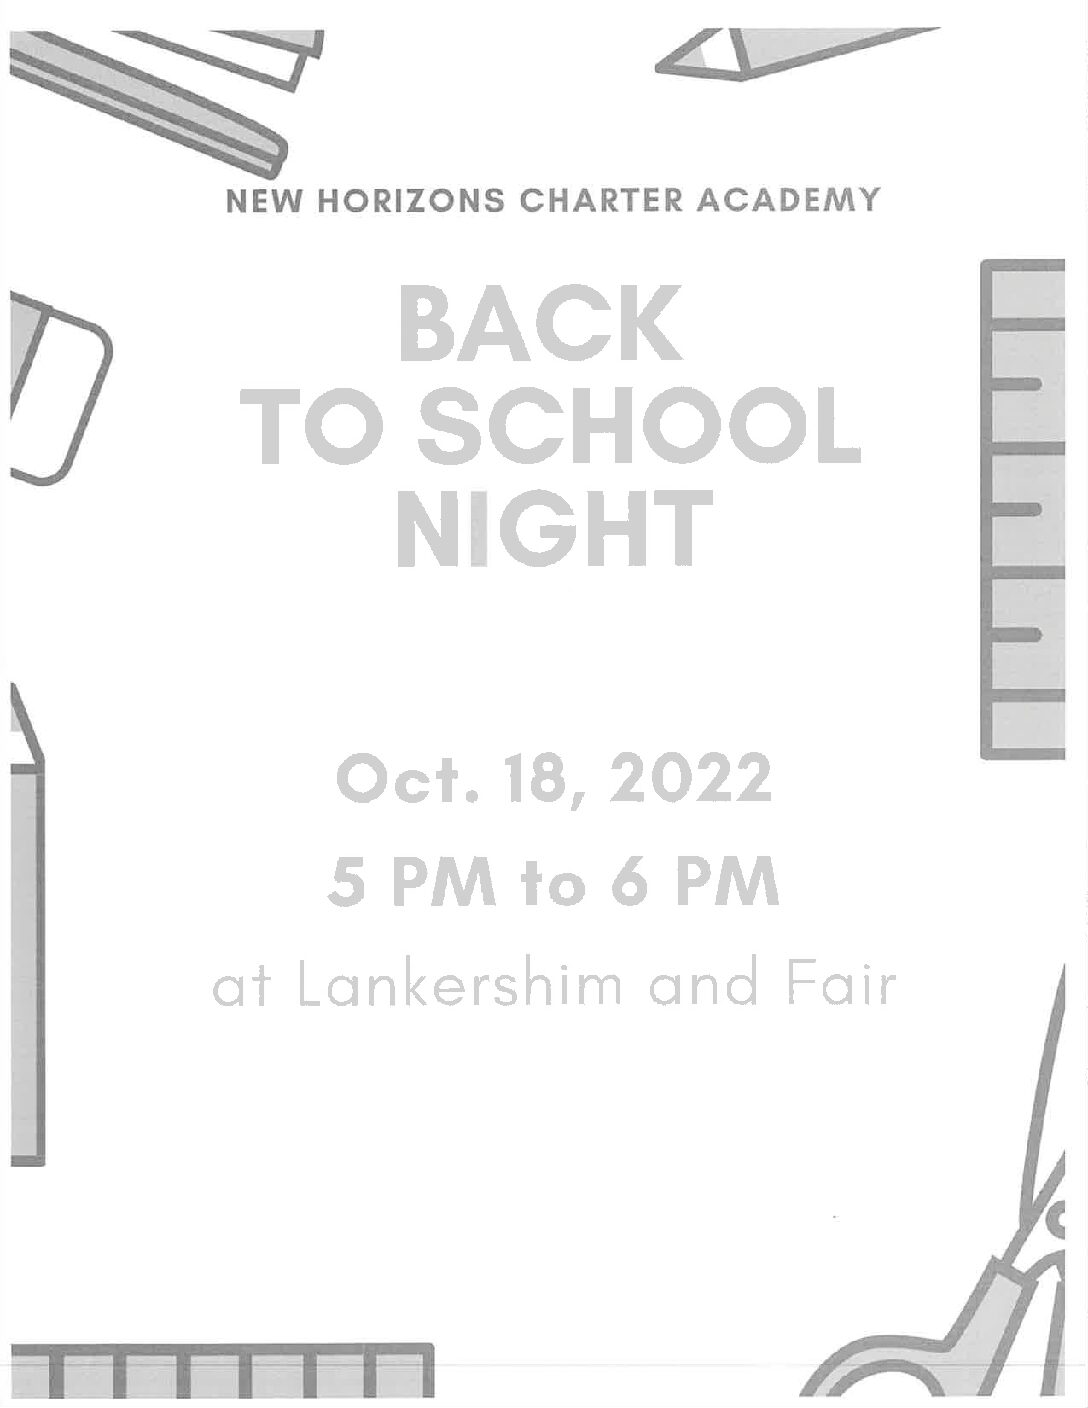 Back to School Night Tuesday October 18th, 2022